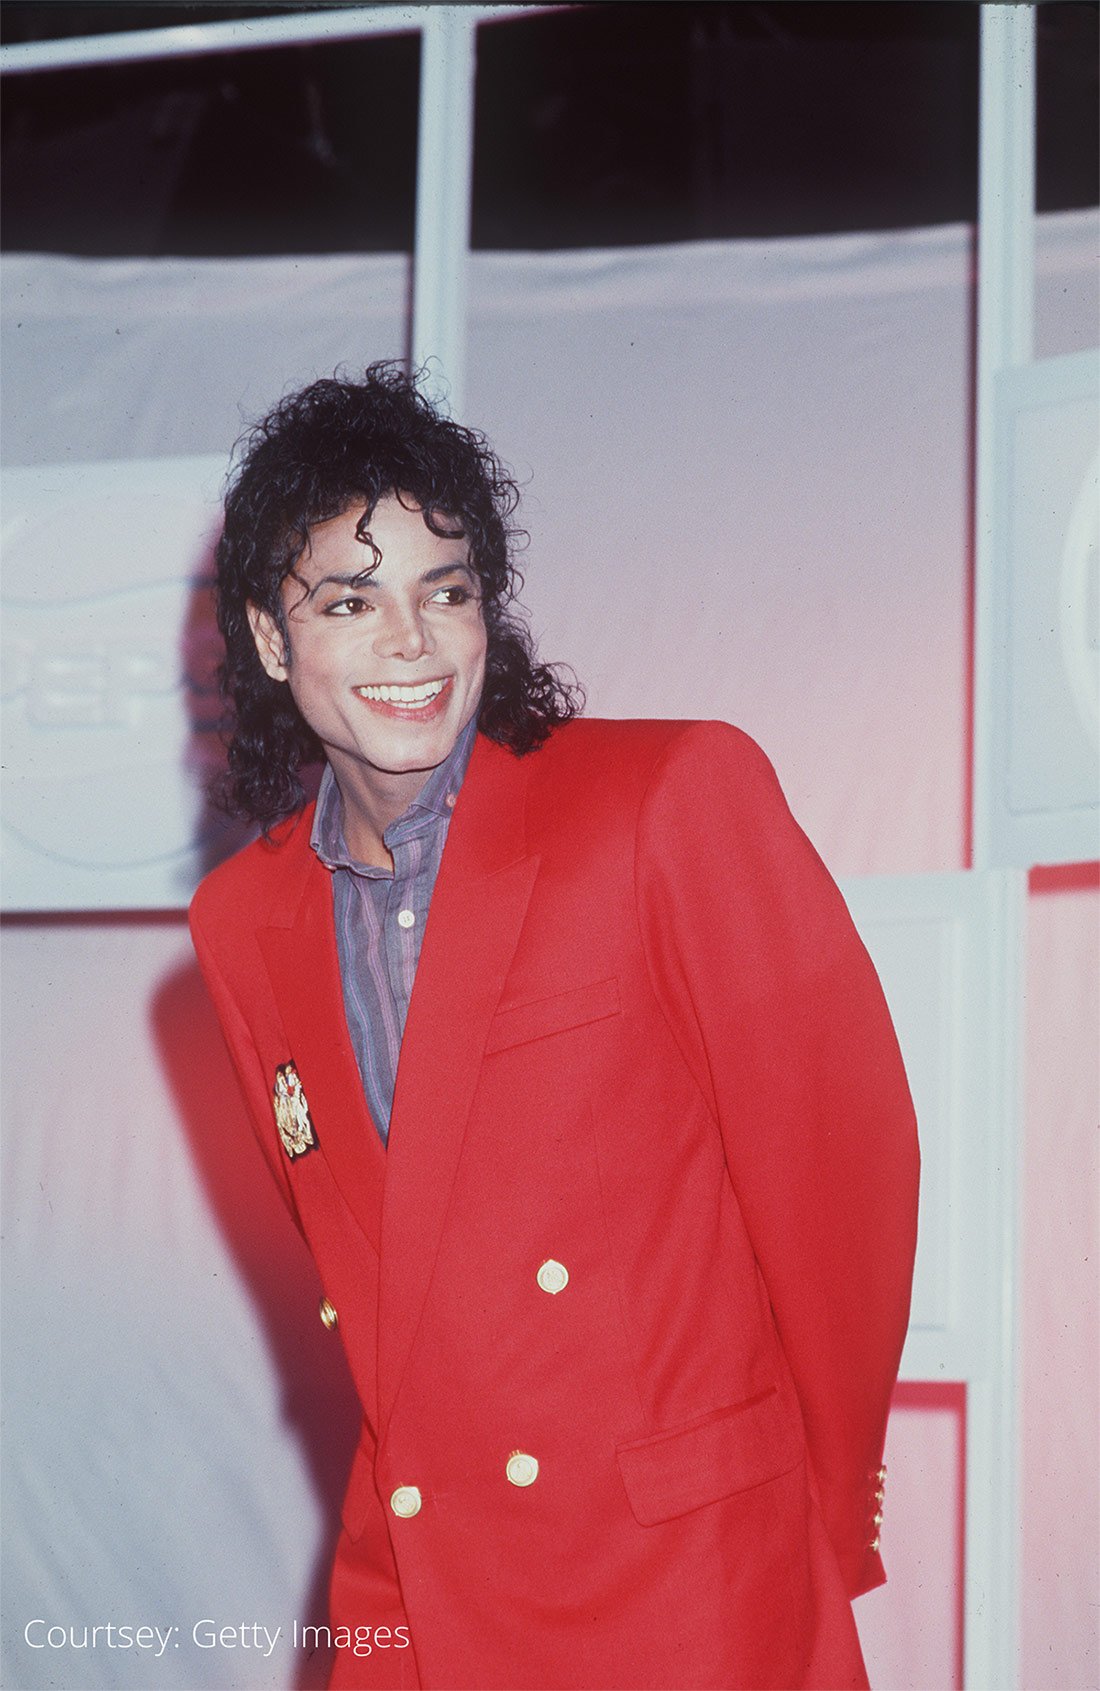 Michael Jackson at a press conference held by his sponsor Pepsi in New York, NY, on March 1, 1988 to present a 0,000 check to the United Negro College Fund.